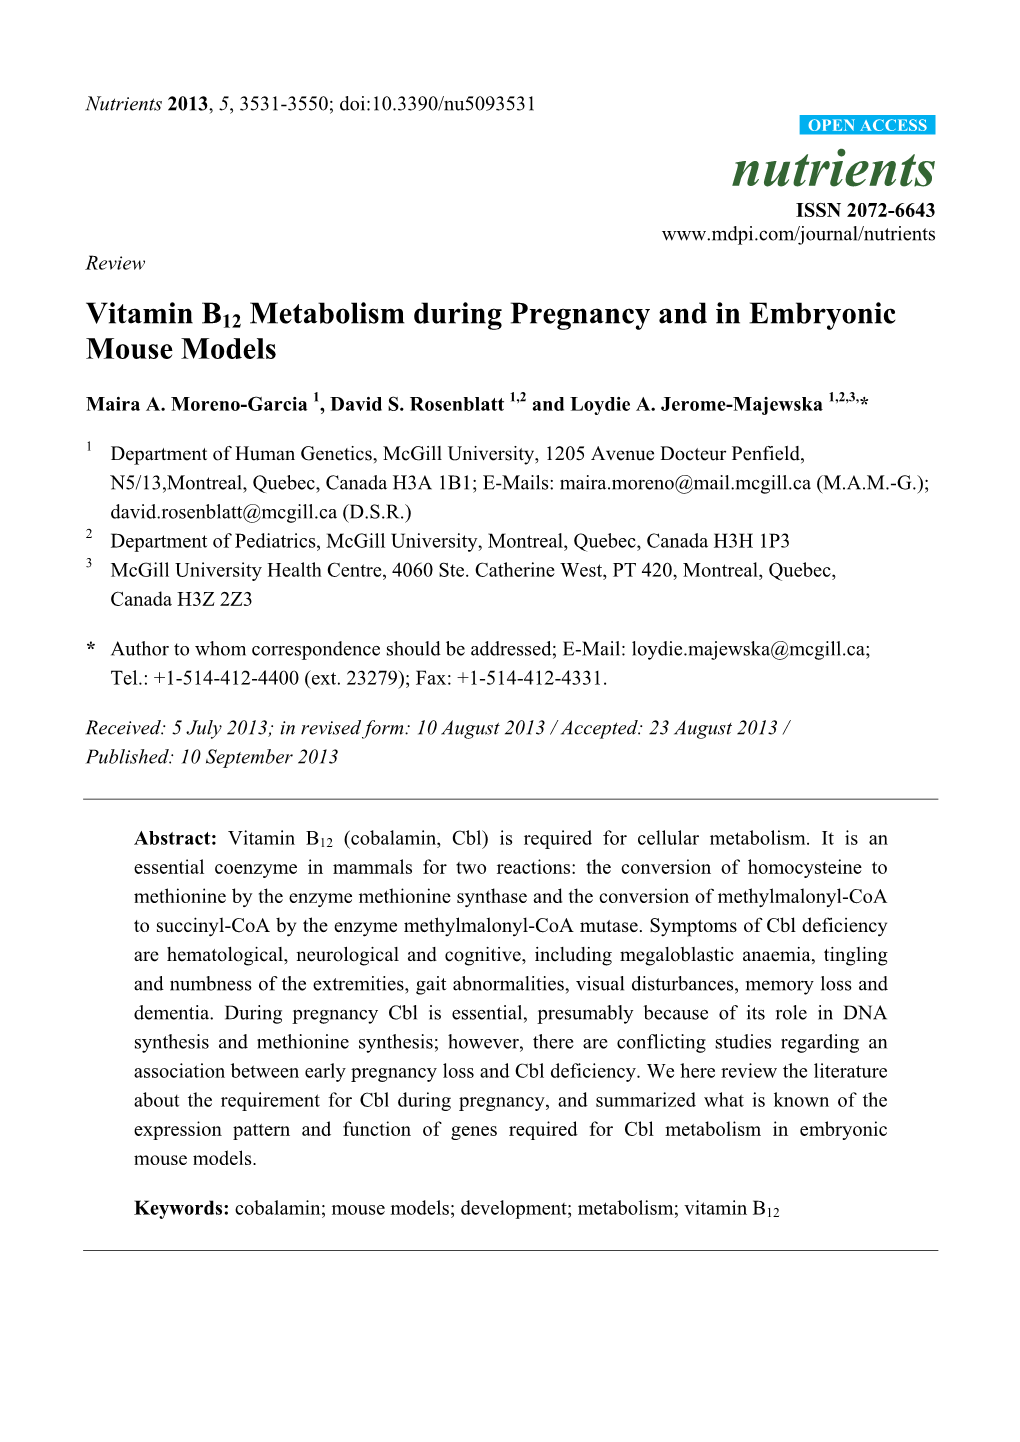 Vitamin B12 Metabolism During Pregnancy and in Embryonic Mouse Models